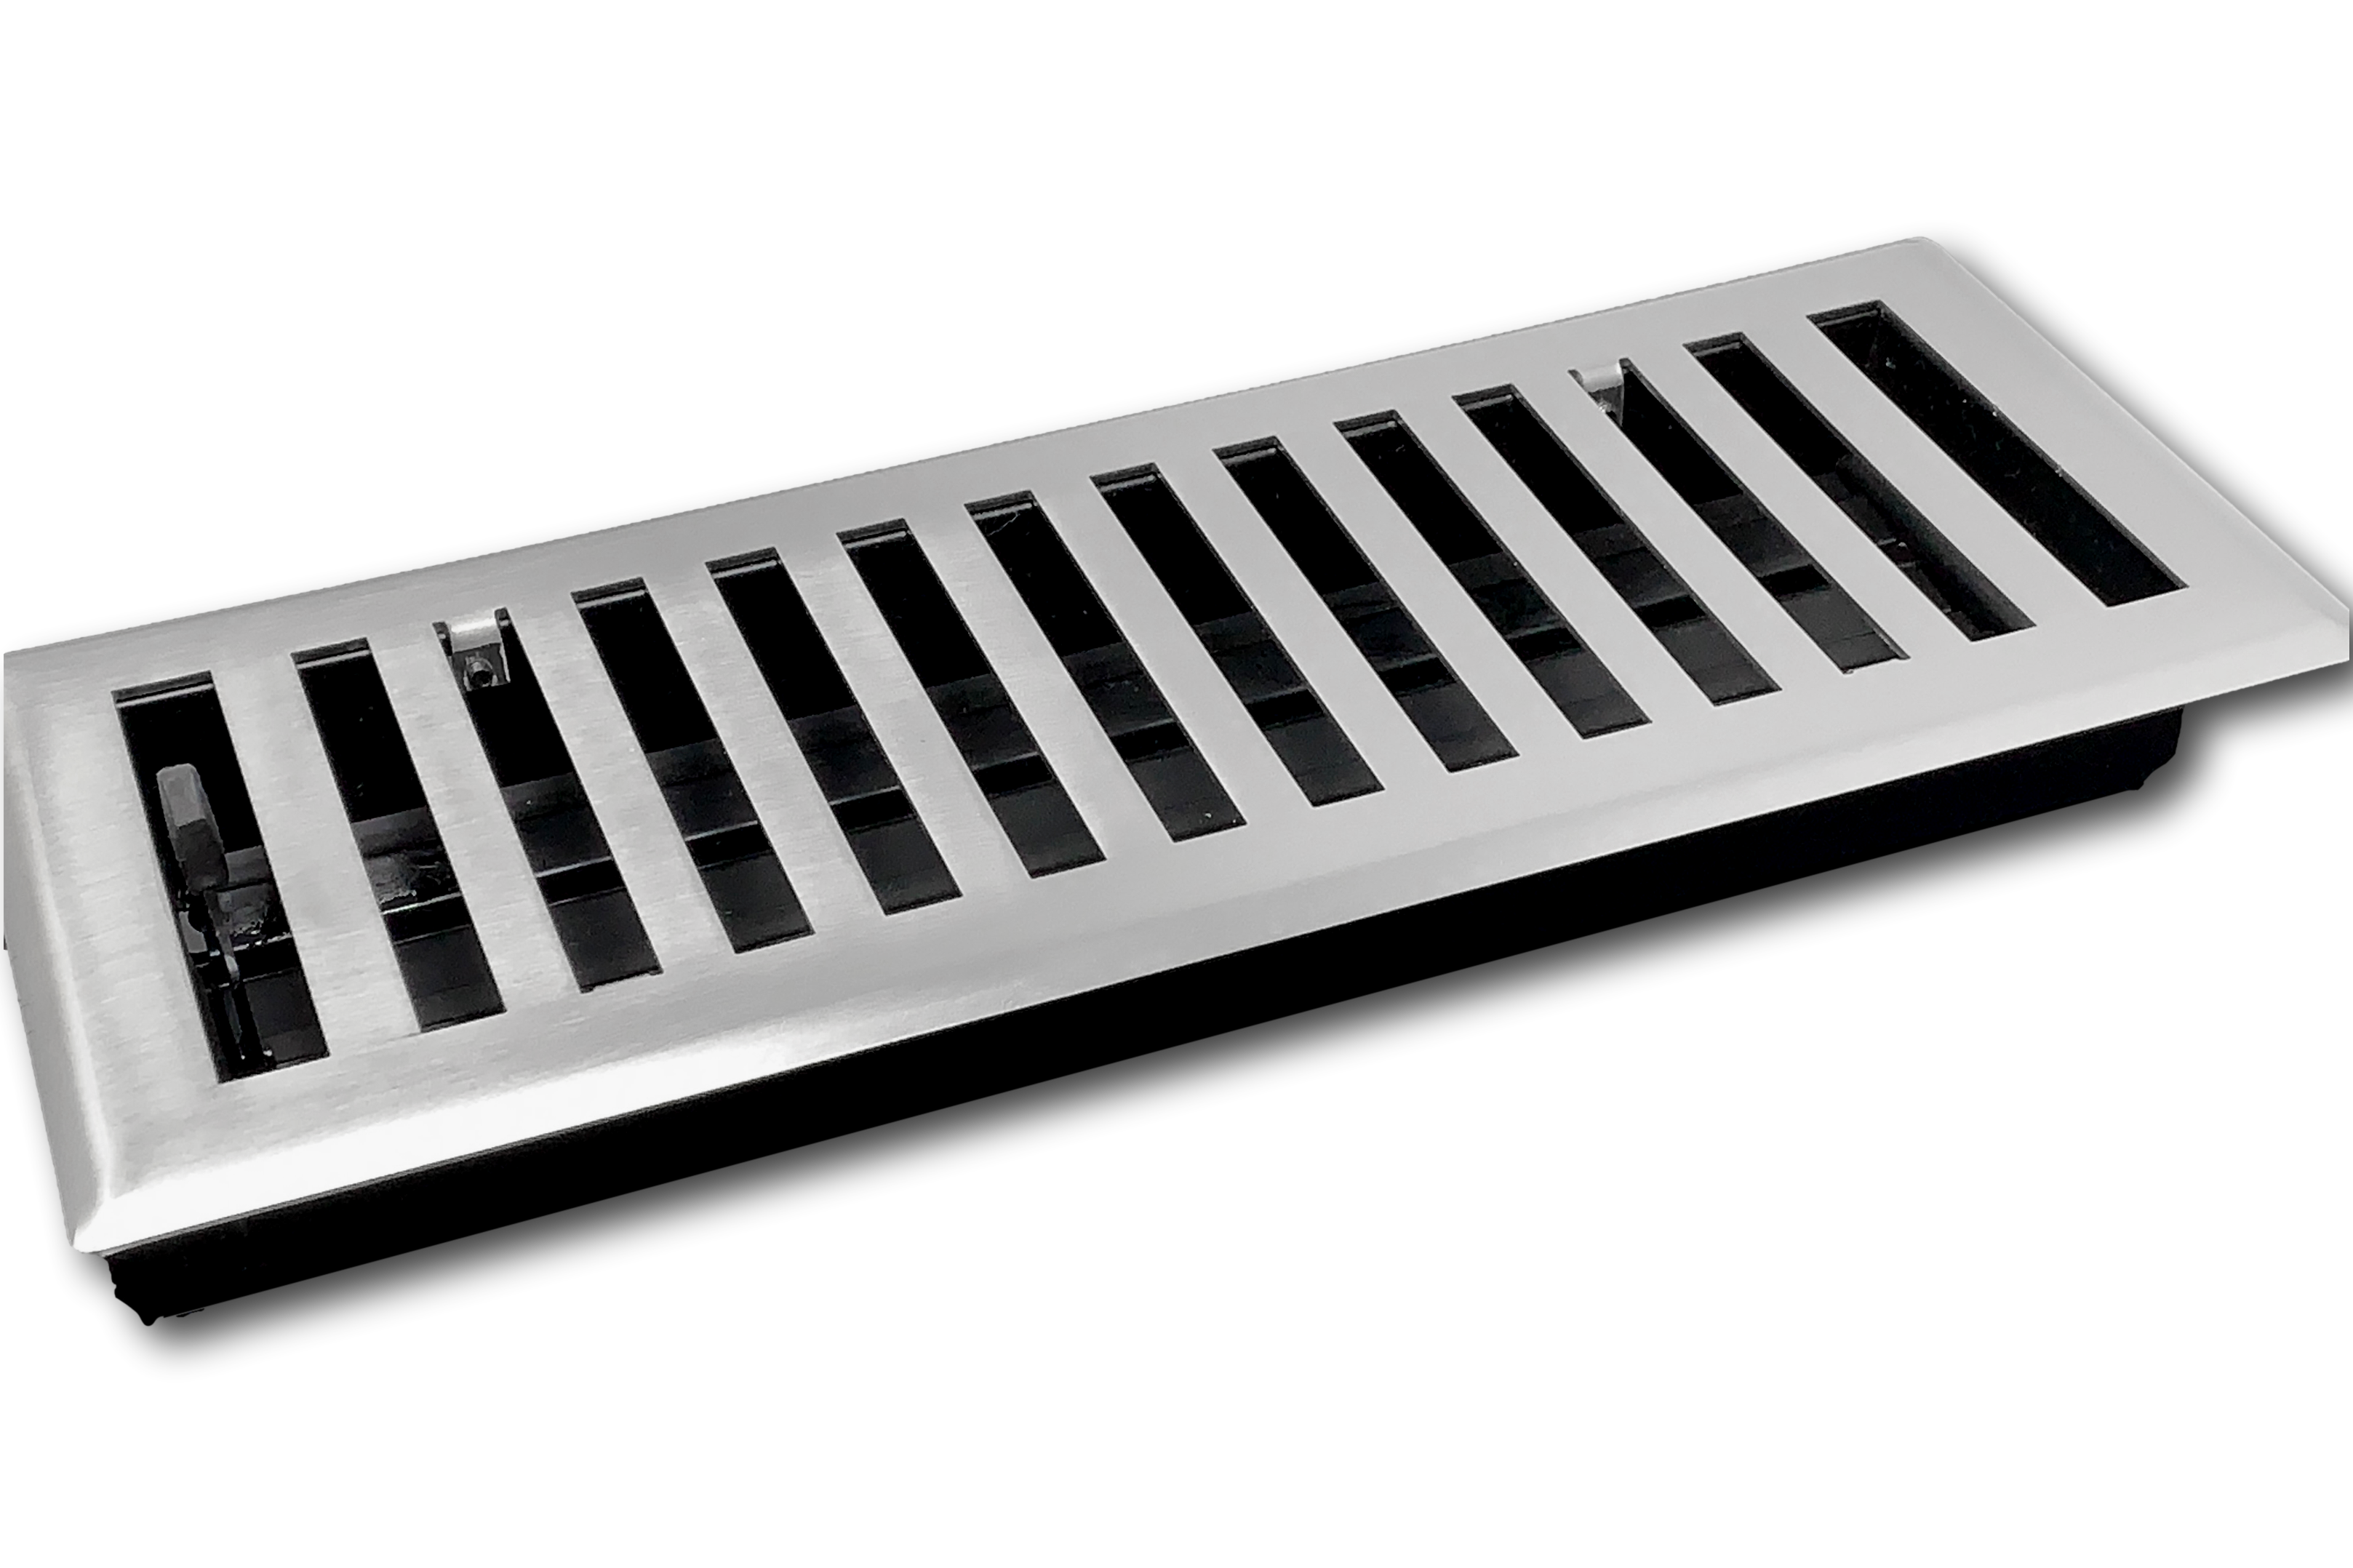 Steel Modern Chic Vent Covers - Brushed Nickel